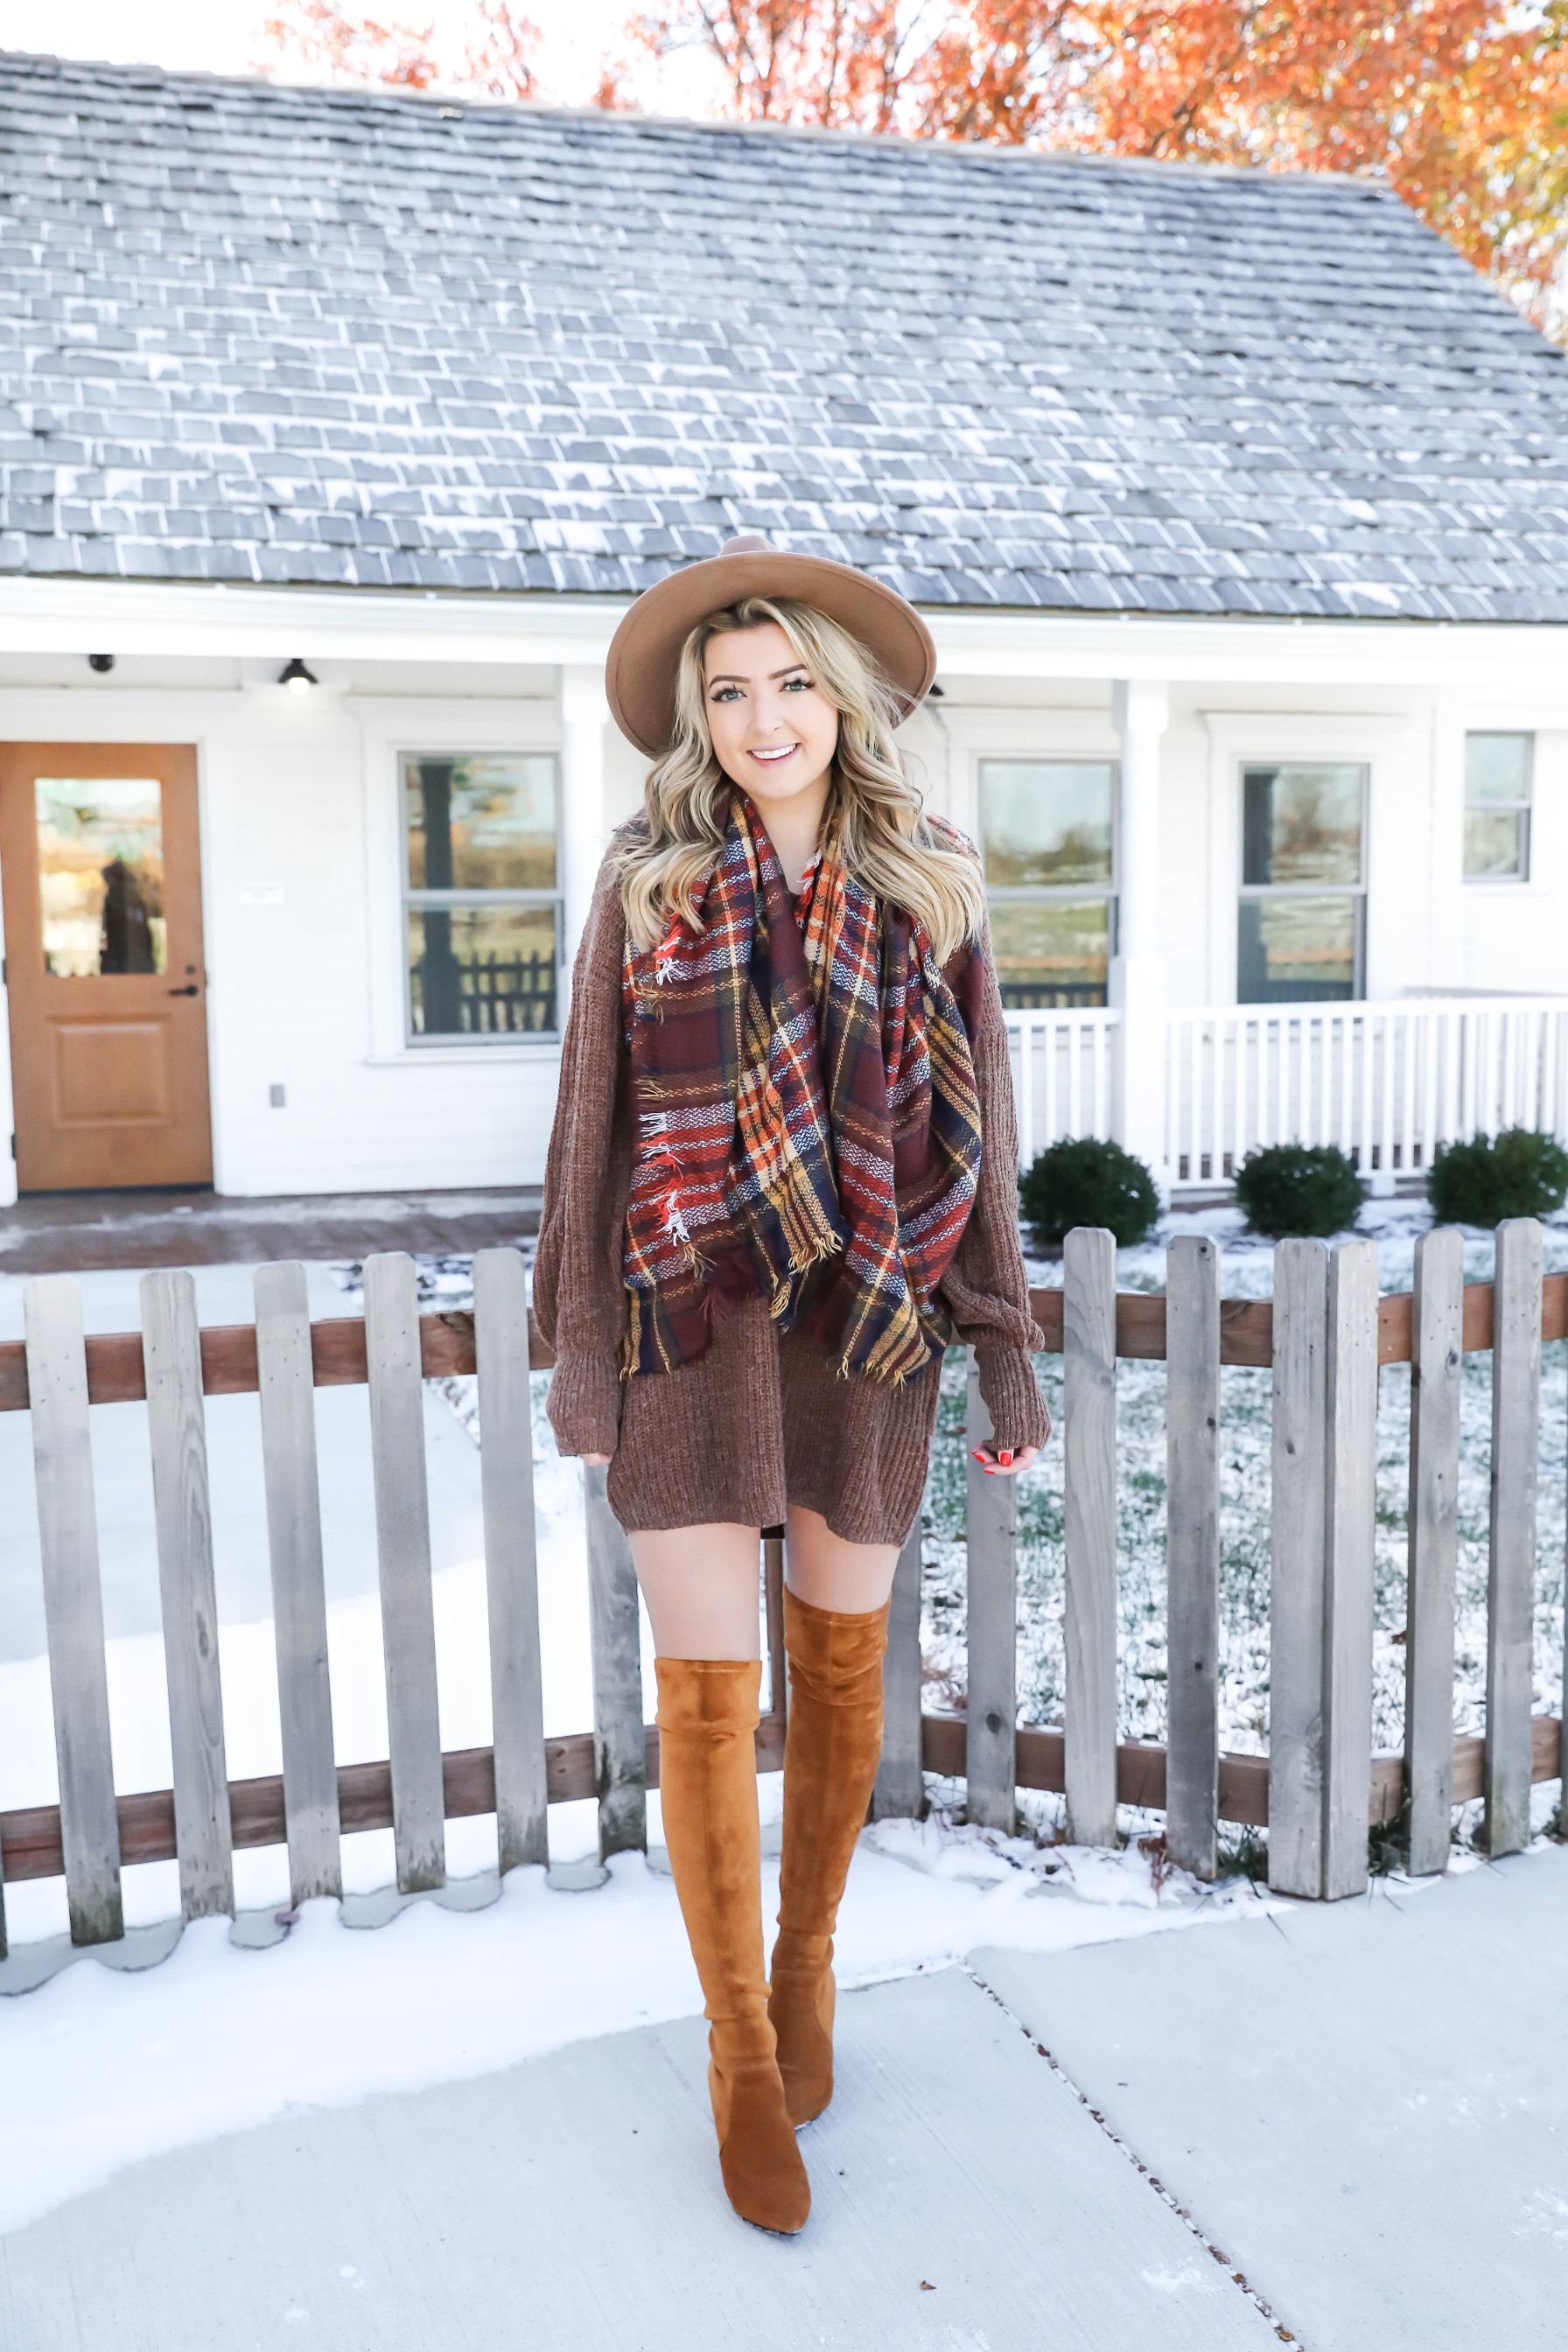 https://dailydoseofcharm.com/wp-content/uploads/2019/11/Thanksgiving-Outfit-Ideas-dressy-and-casual-daily-dose-of-charm-lauren-lindmark-4P6A8638.jpg